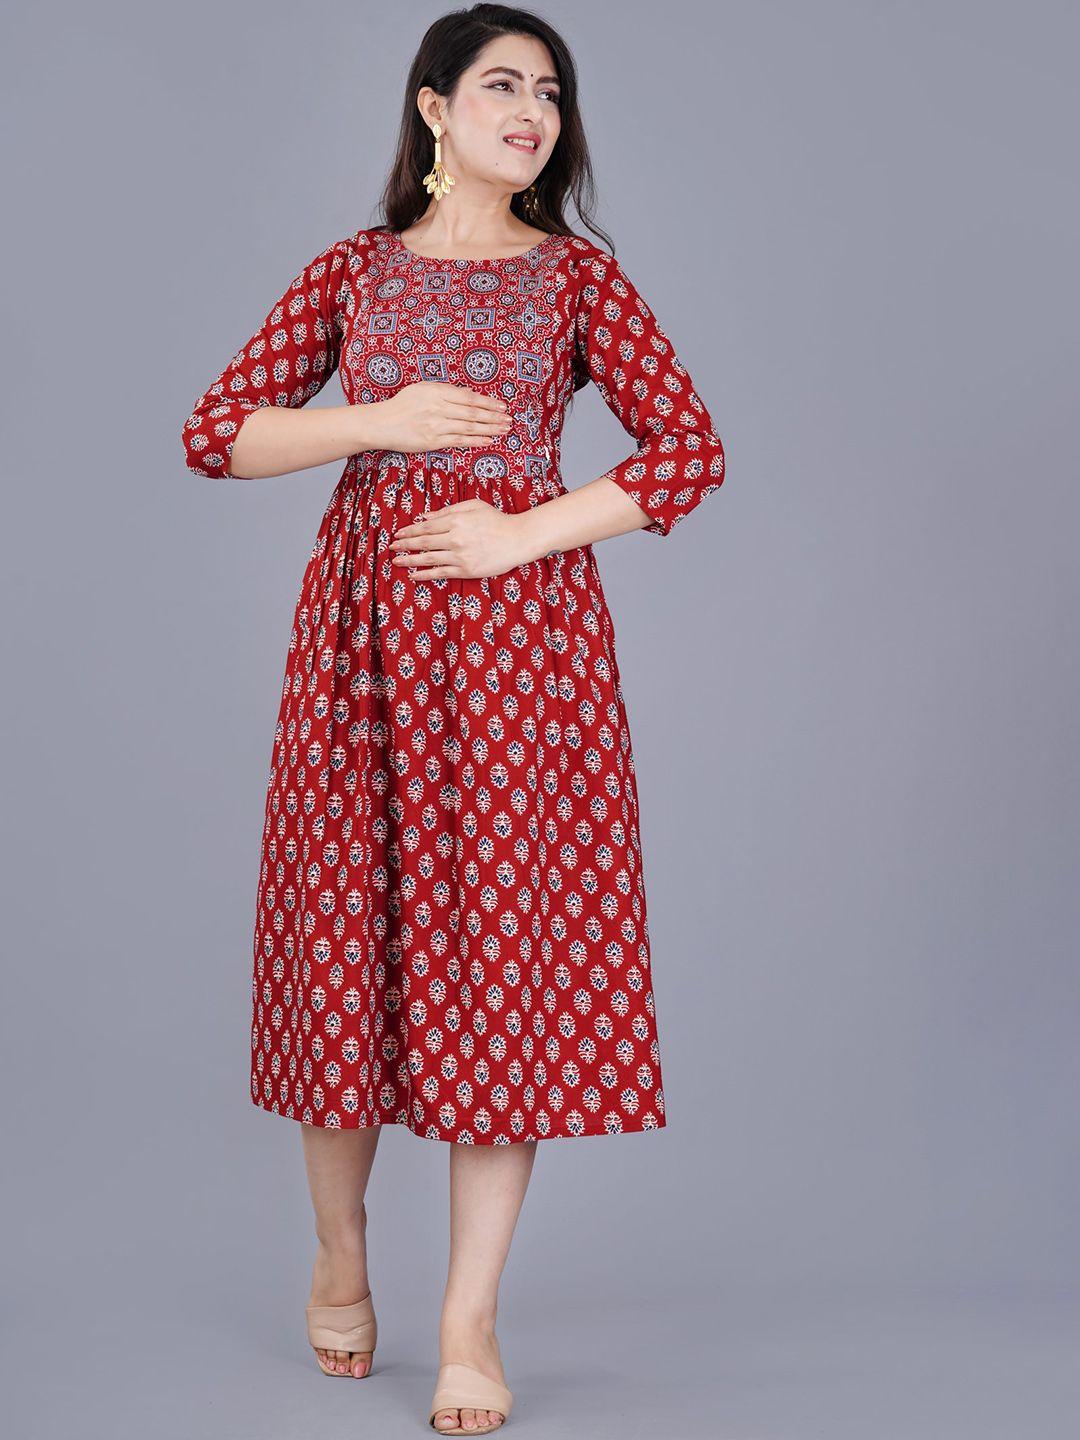 trend me ethnic motifs printed pure cotton maternity a-line ethnic dress